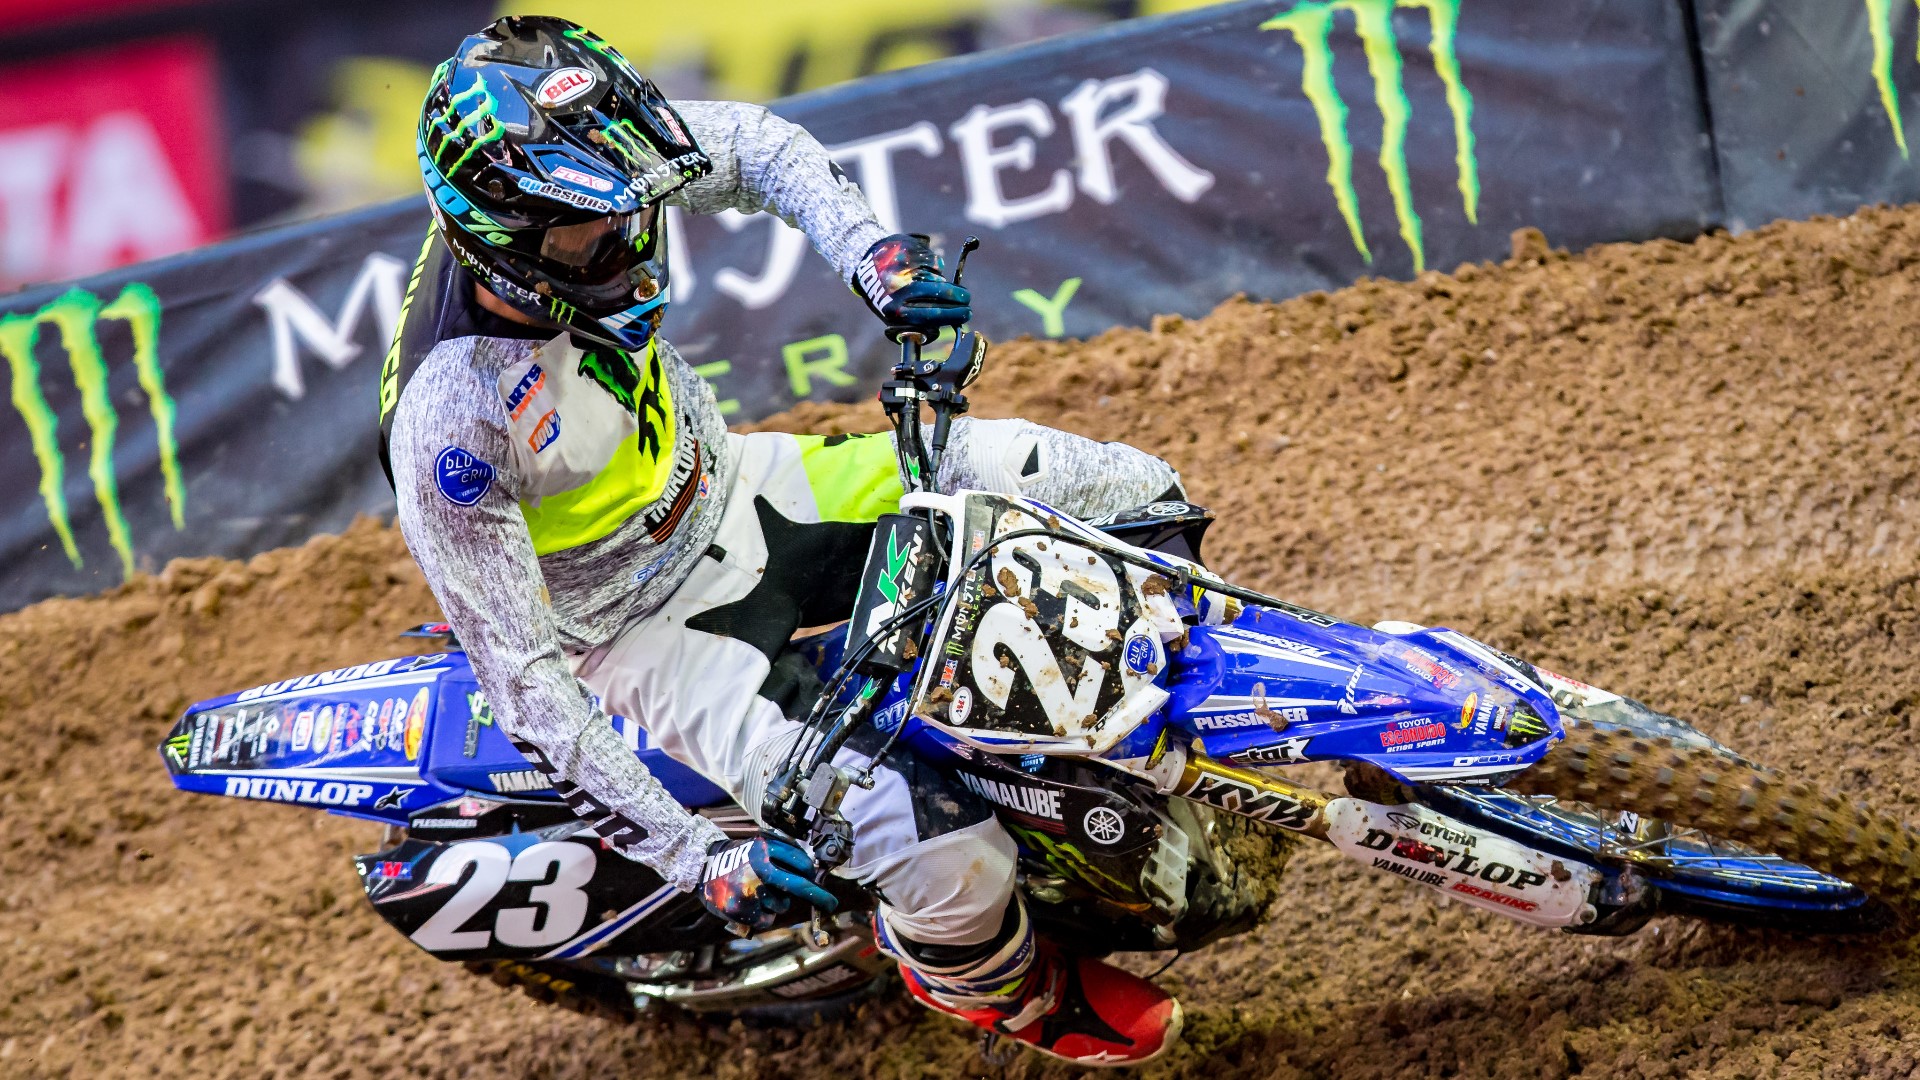 Monster Energy AMA Supercross coming to Broncos Stadium this weekend 9news